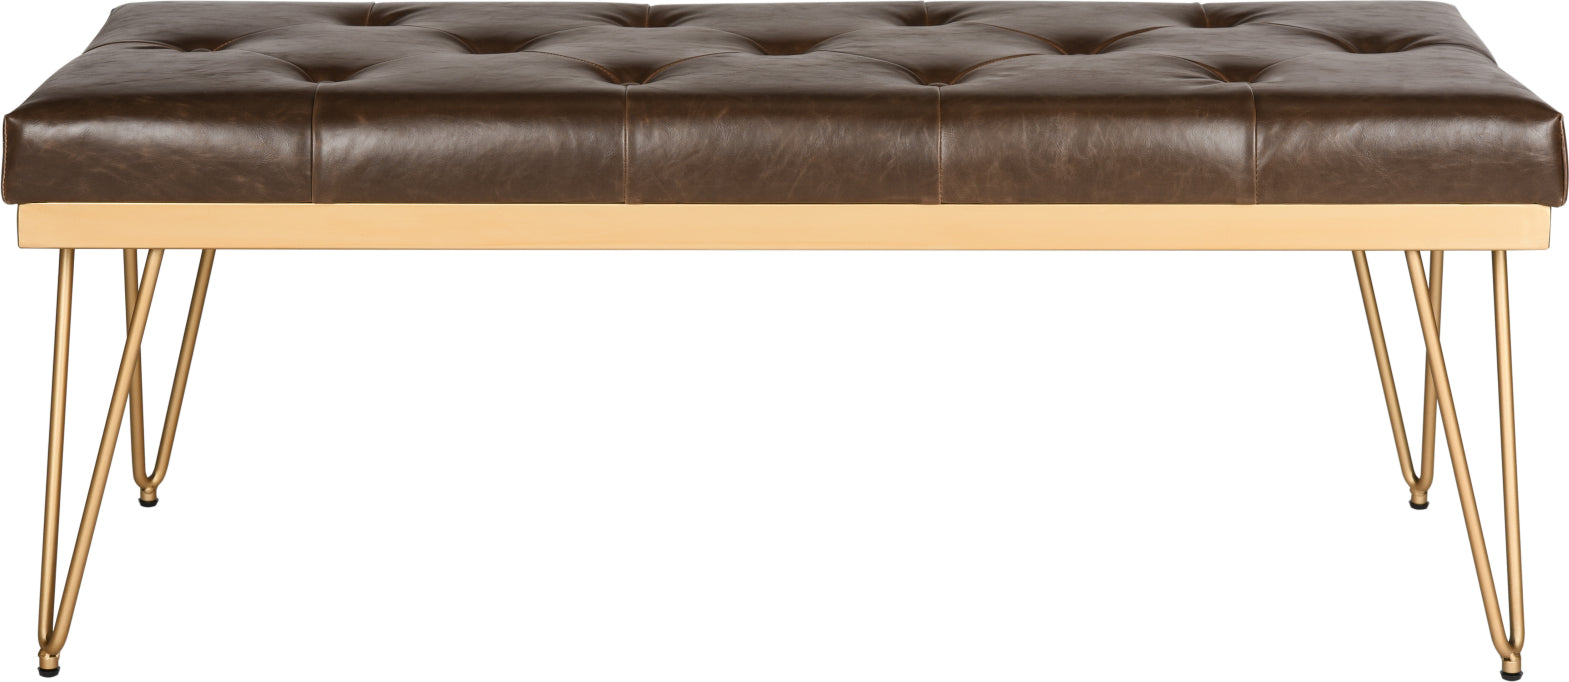 Safavieh Marcella Bench Brown and Gold Furniture main image